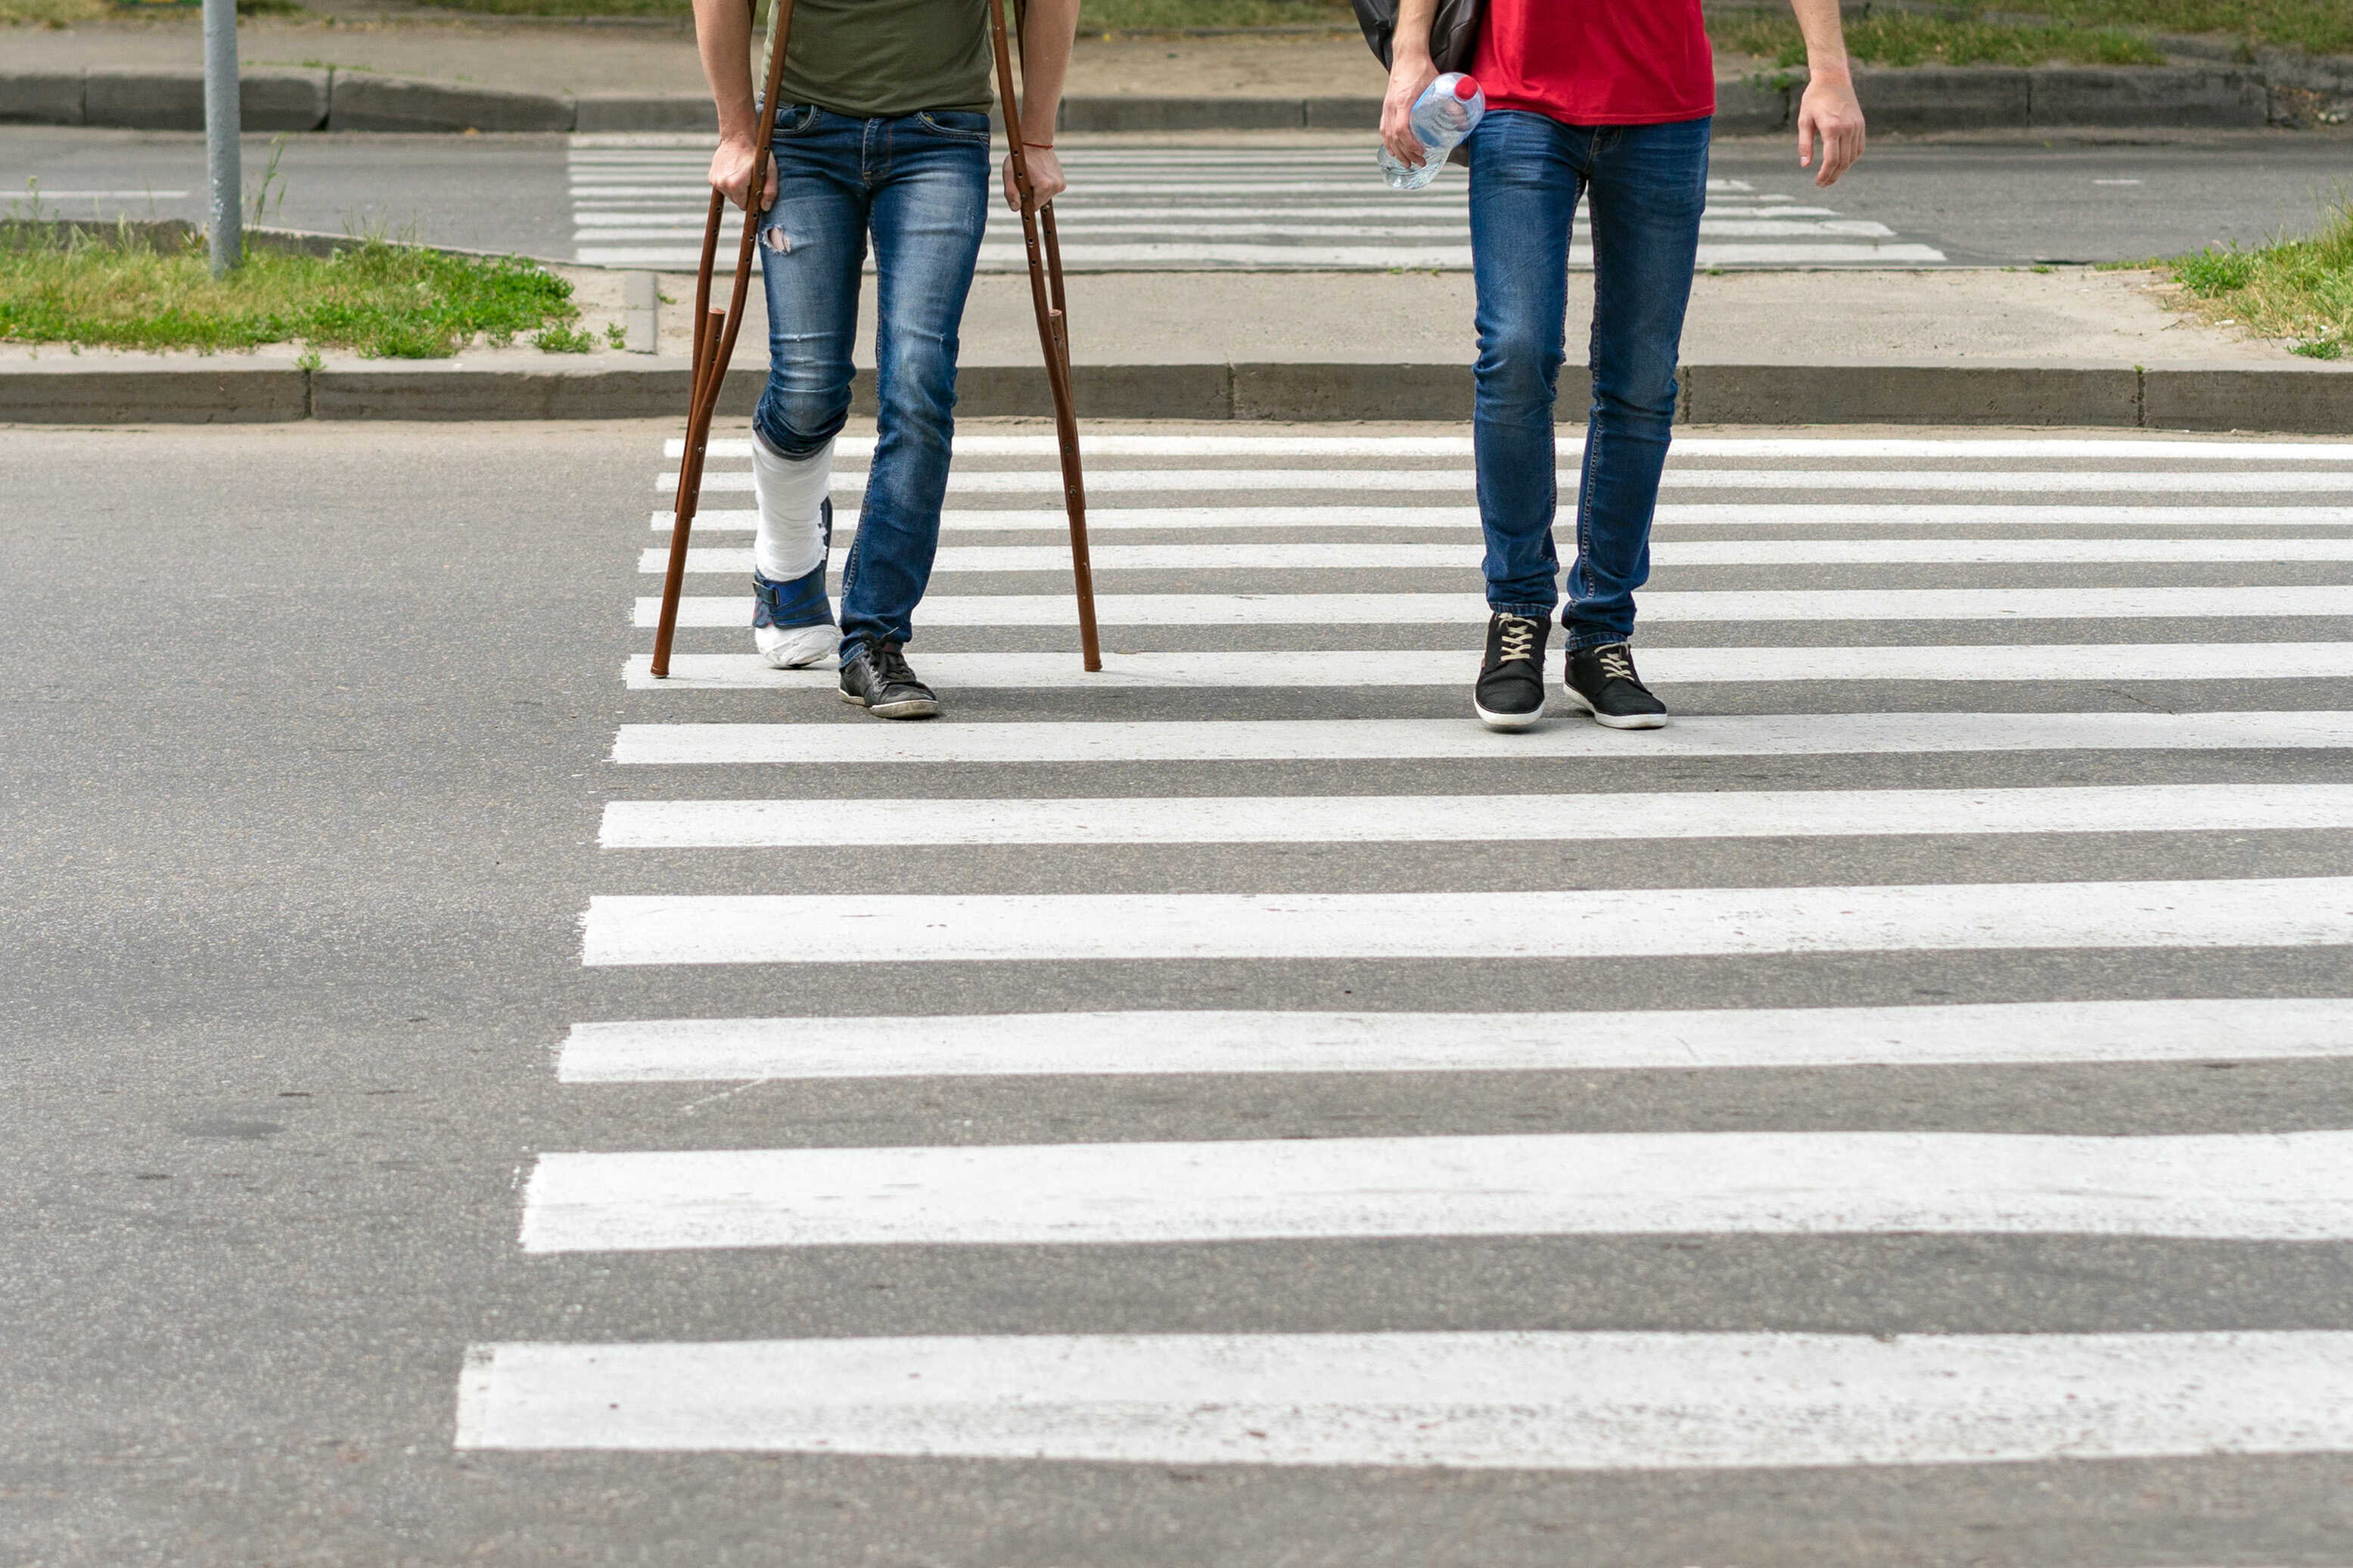 an injured person walking across crosswalk on crutches with friend